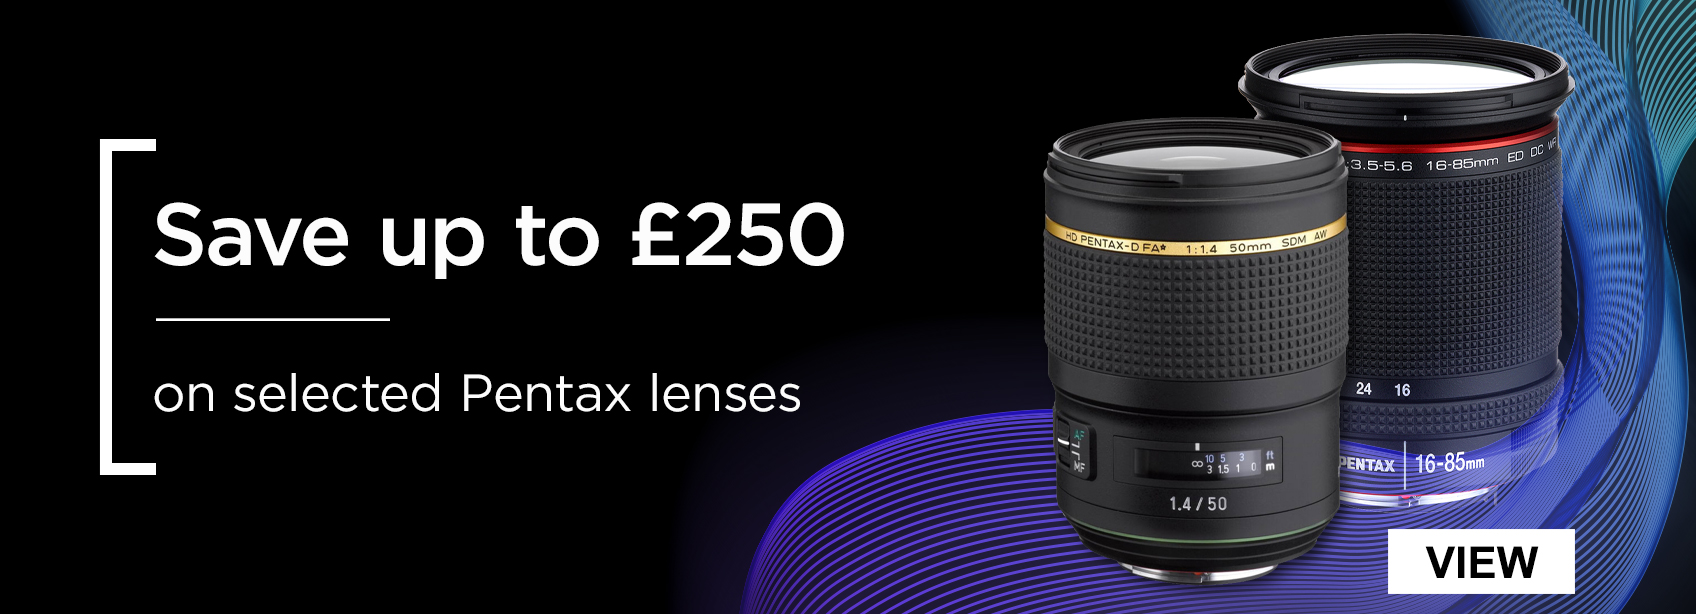 Save up to £250 on selected Pentax lenses